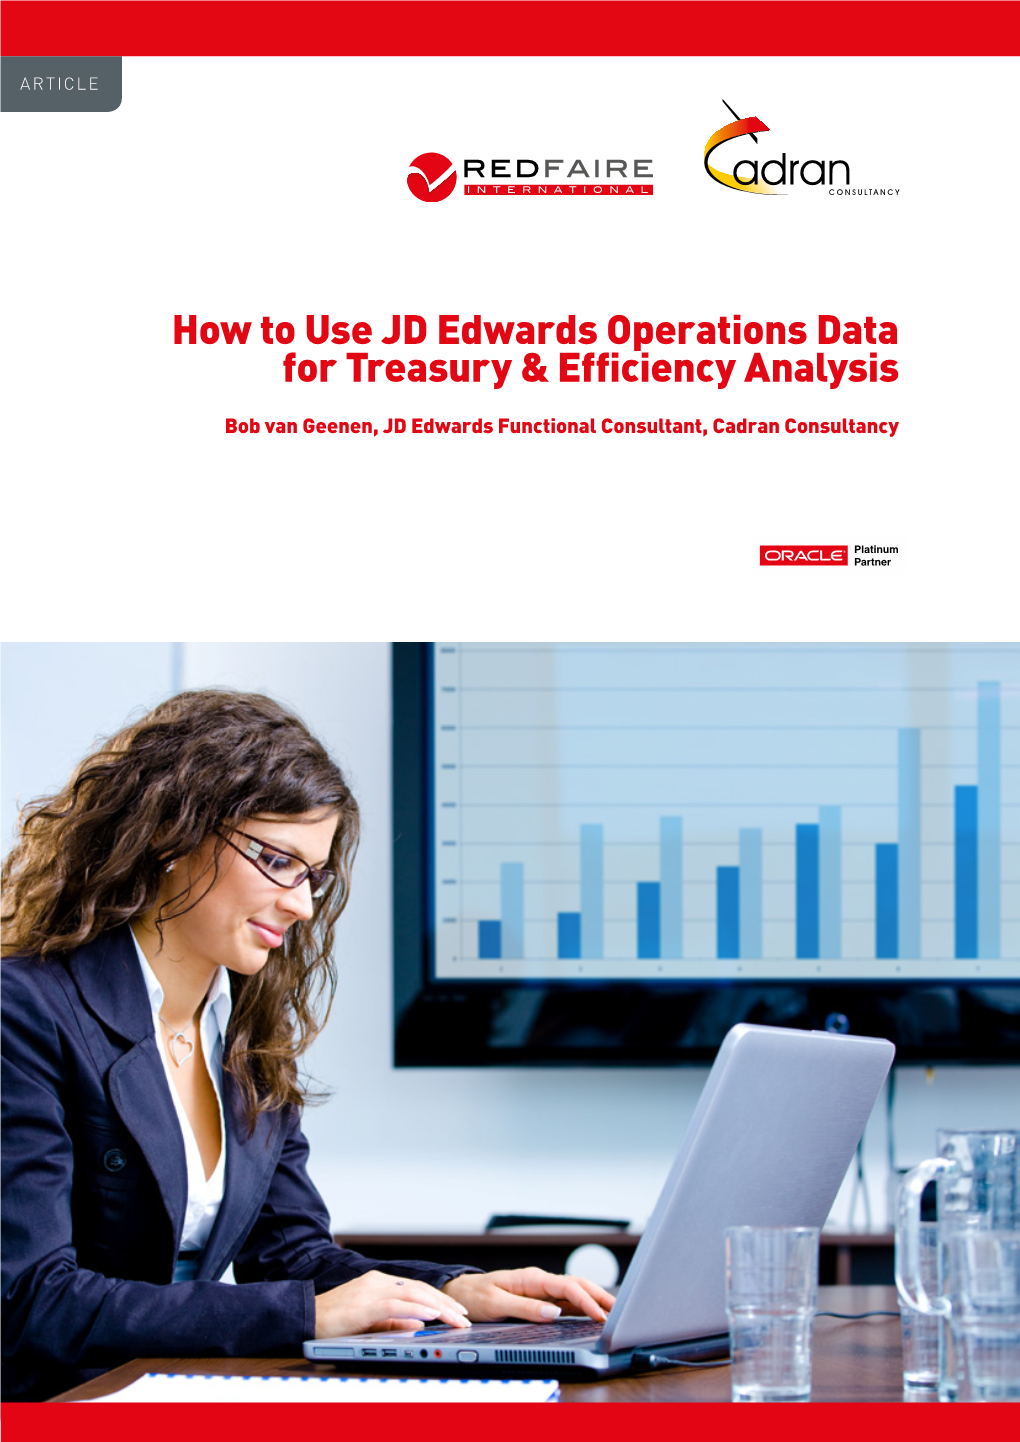 How to Use JD Edwards Operations Data for Treasury & Efficiency